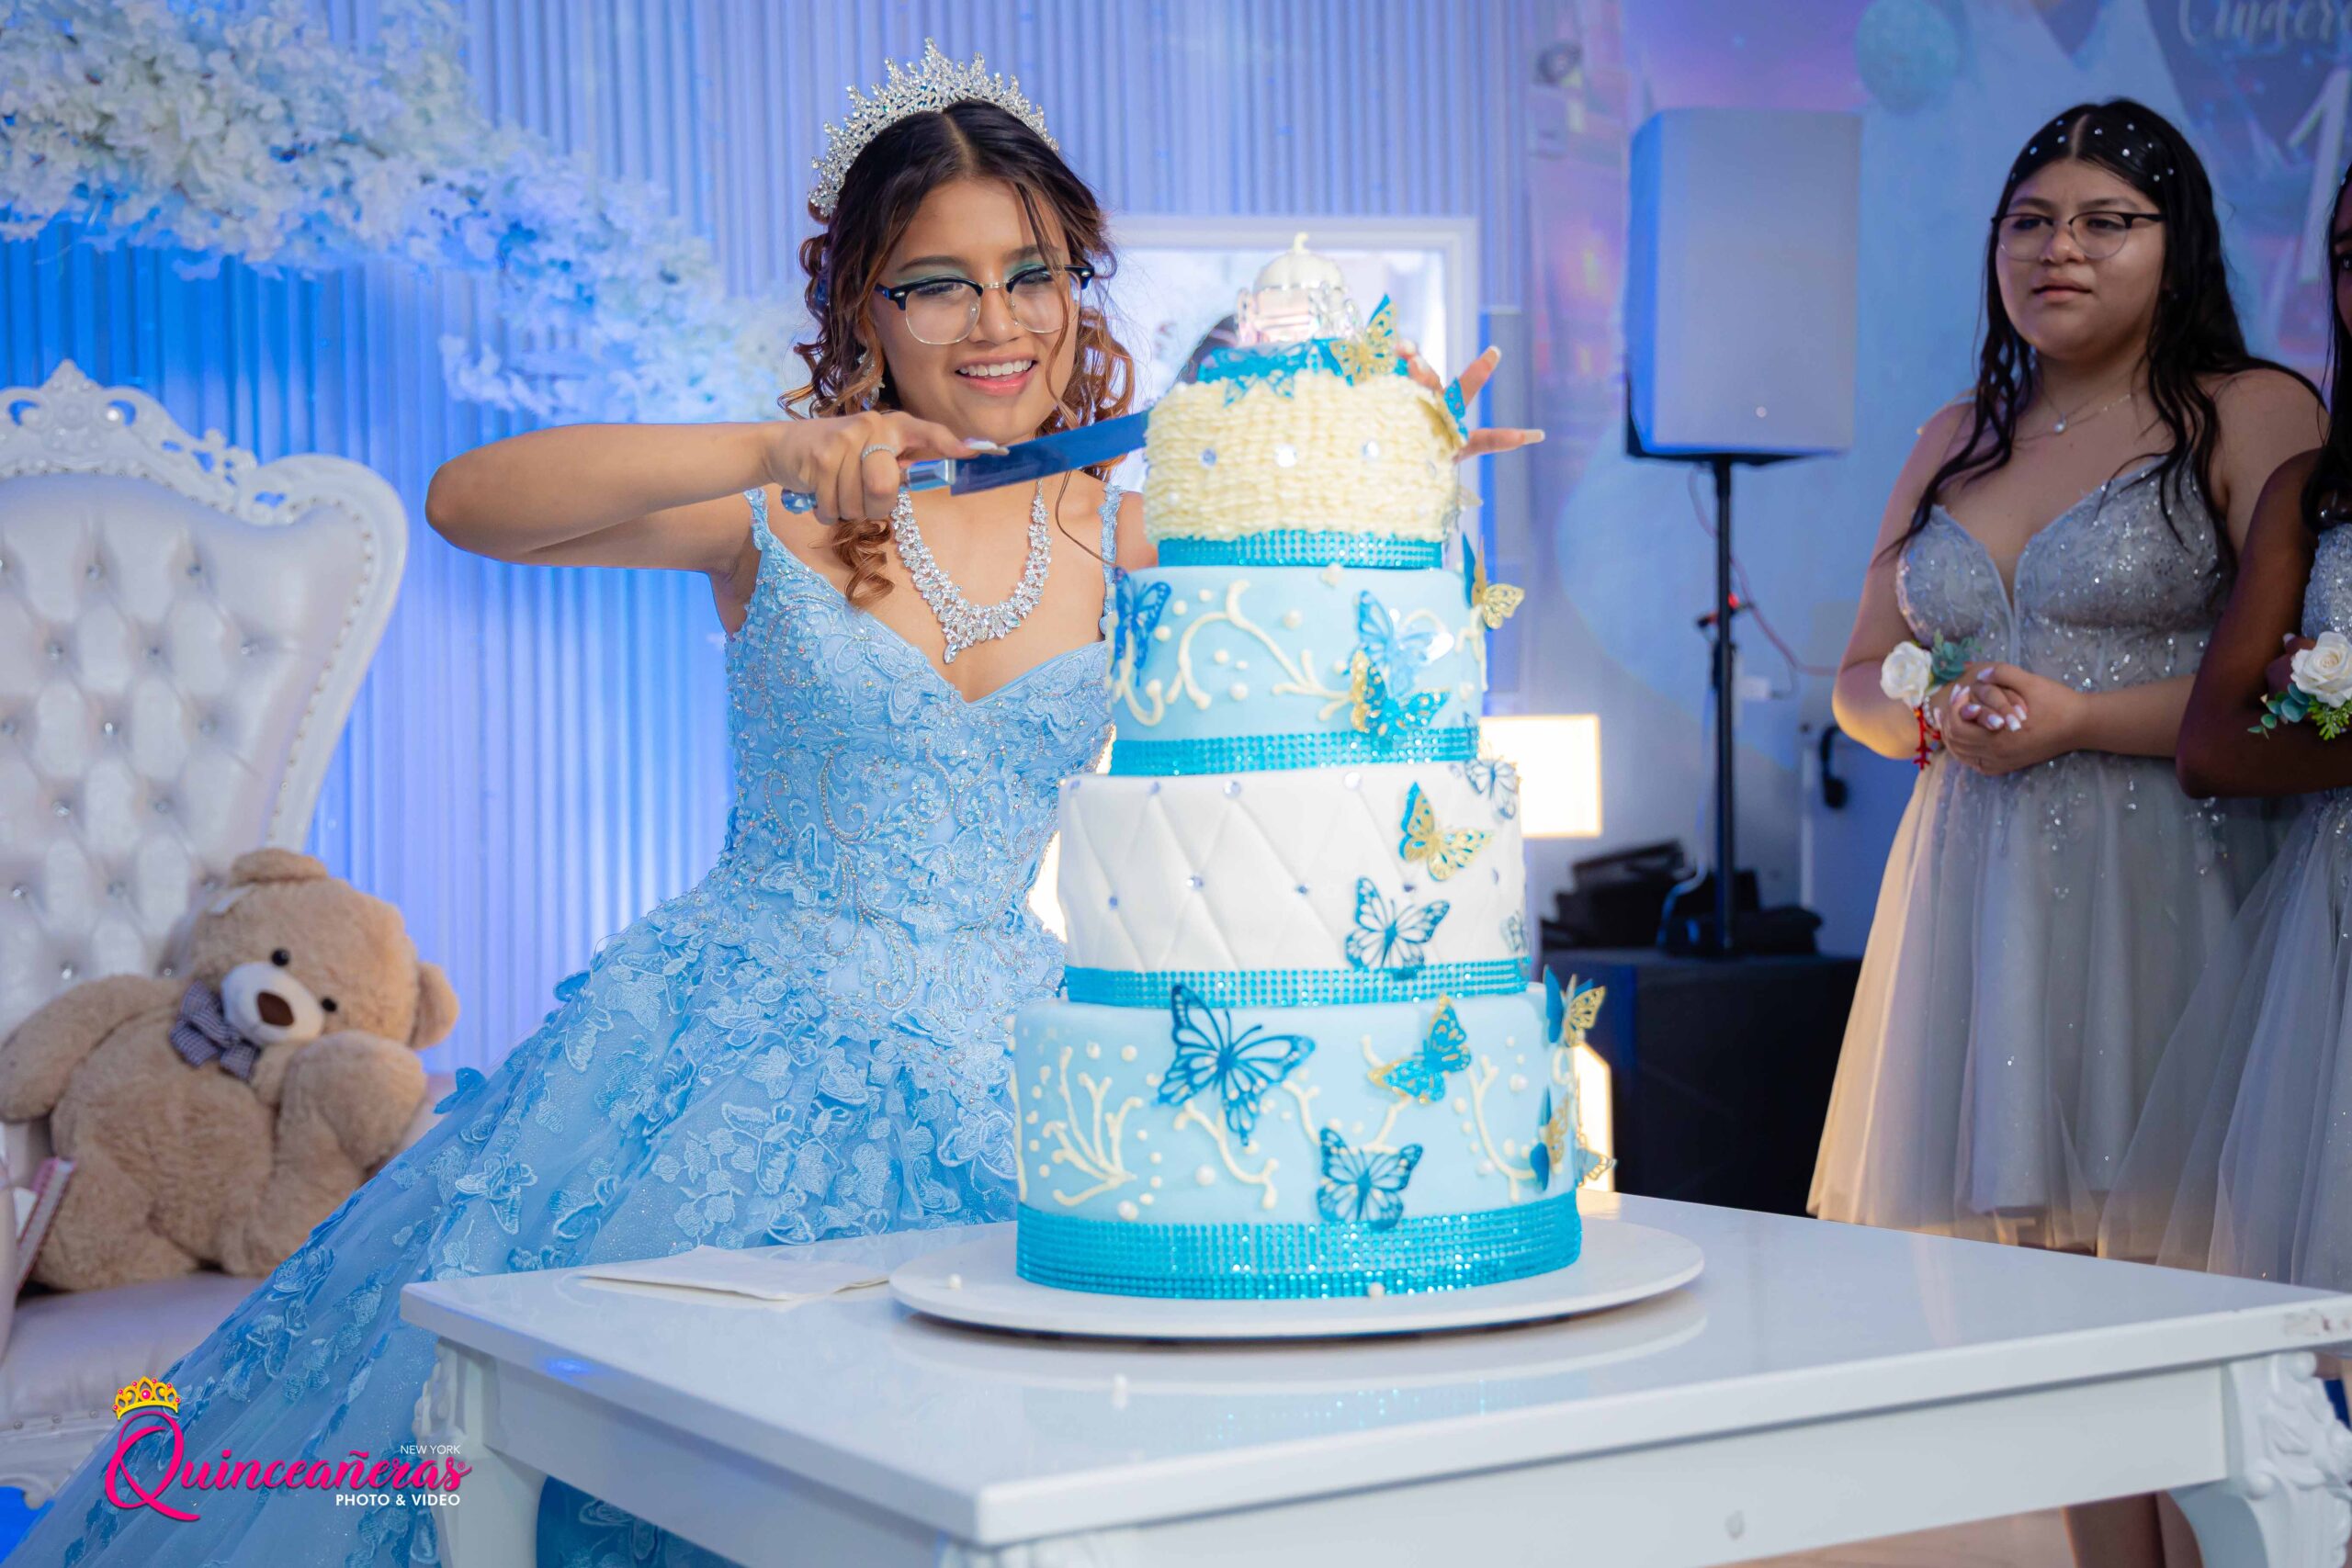 The wedding of Lorraine S Local Top Choice Quinceañera & Wedding Photography & Video Company servicing NY & NJ